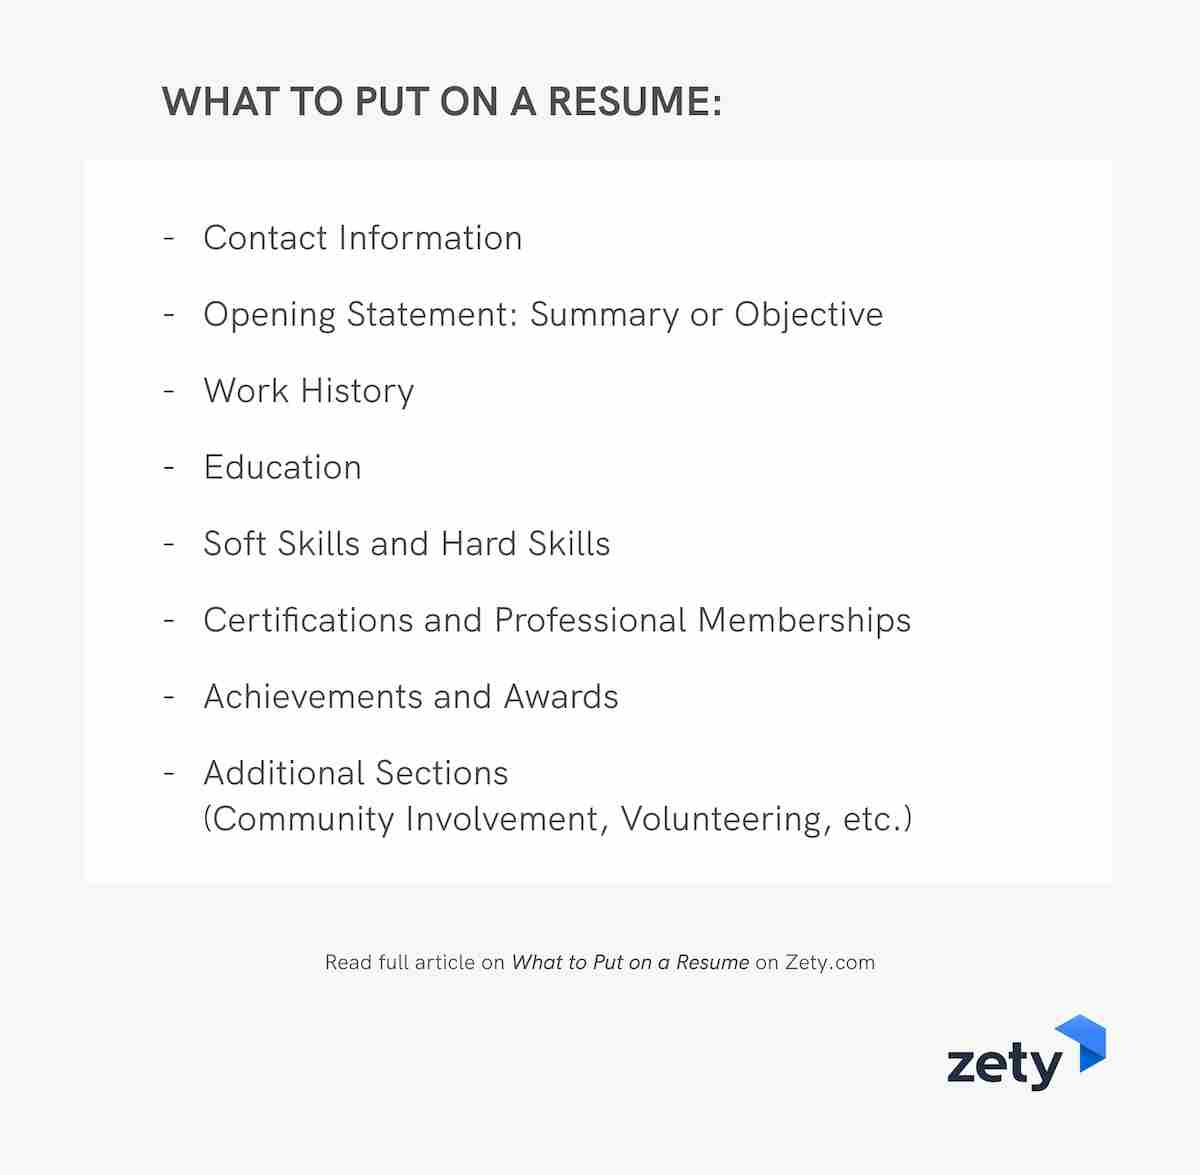 Top 9 Tips With RESUME